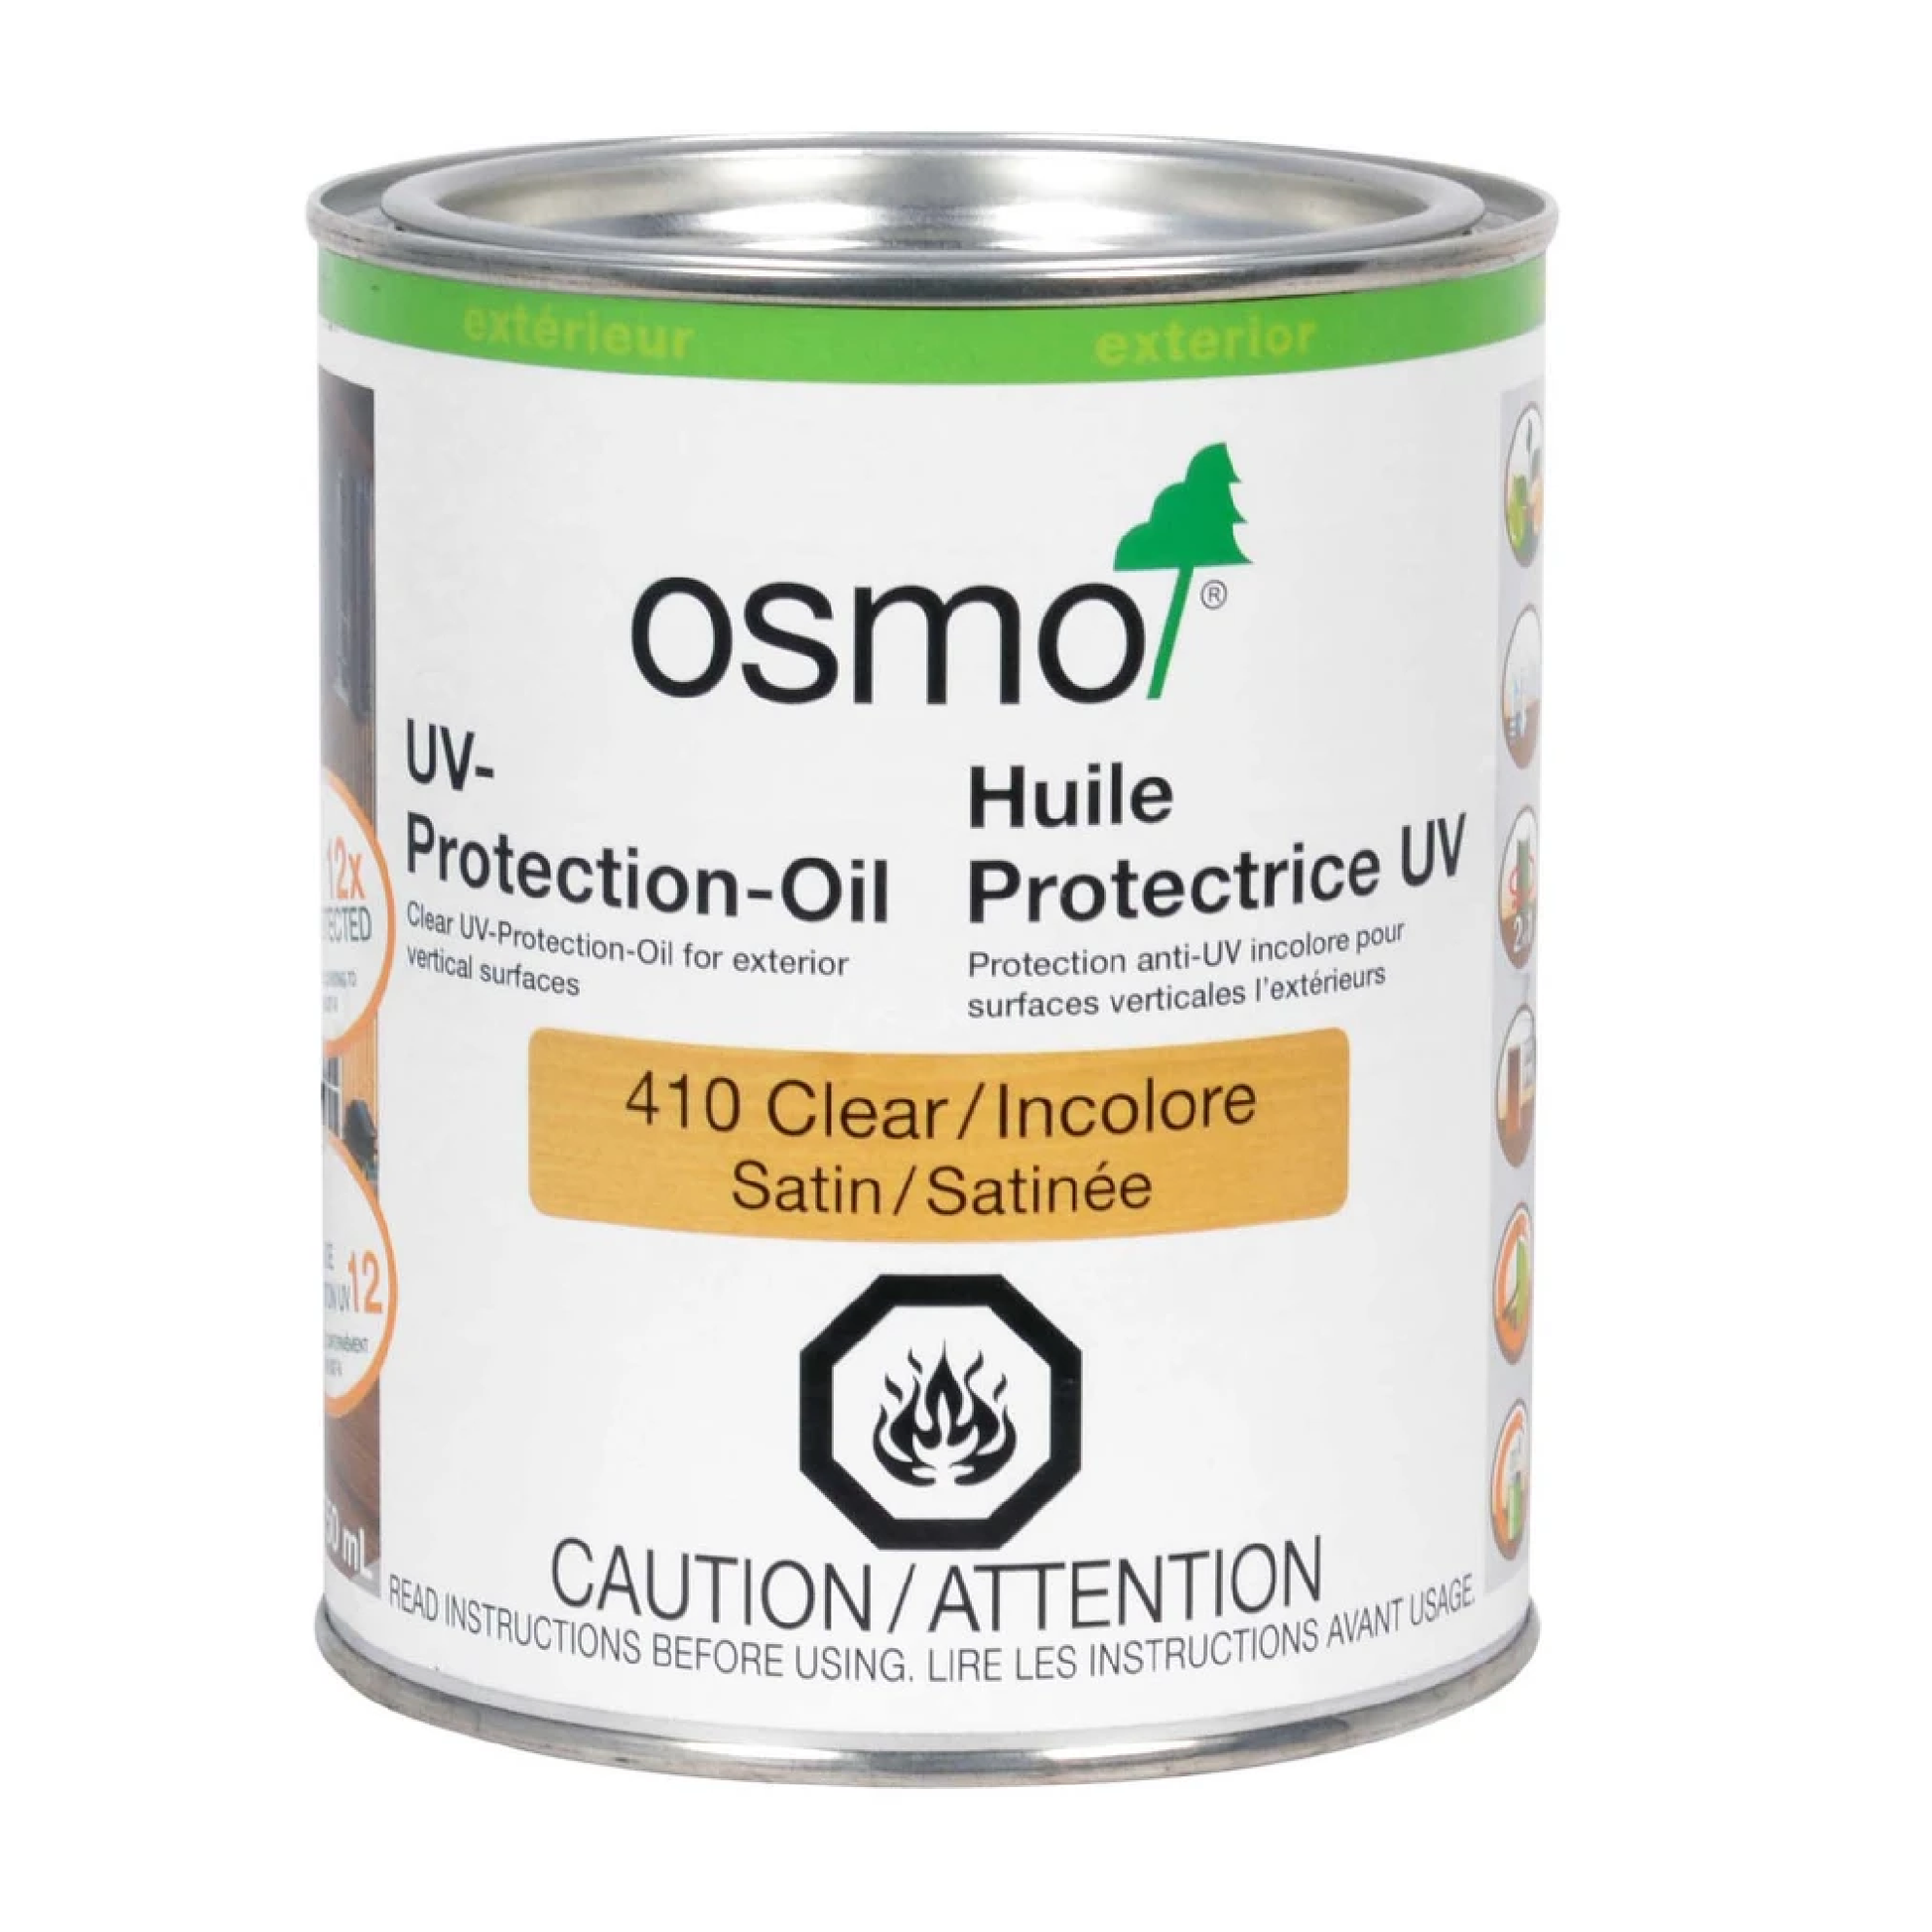 UV Protection, Osmo Oil, Polyx Oil, Wood Finishing Oil, Epoxy Resin Finish, Epoxy Resin Oil, Epoxy Top Oil, Charcuterie Board Oil, Cutting Board Oil, Wood Wax